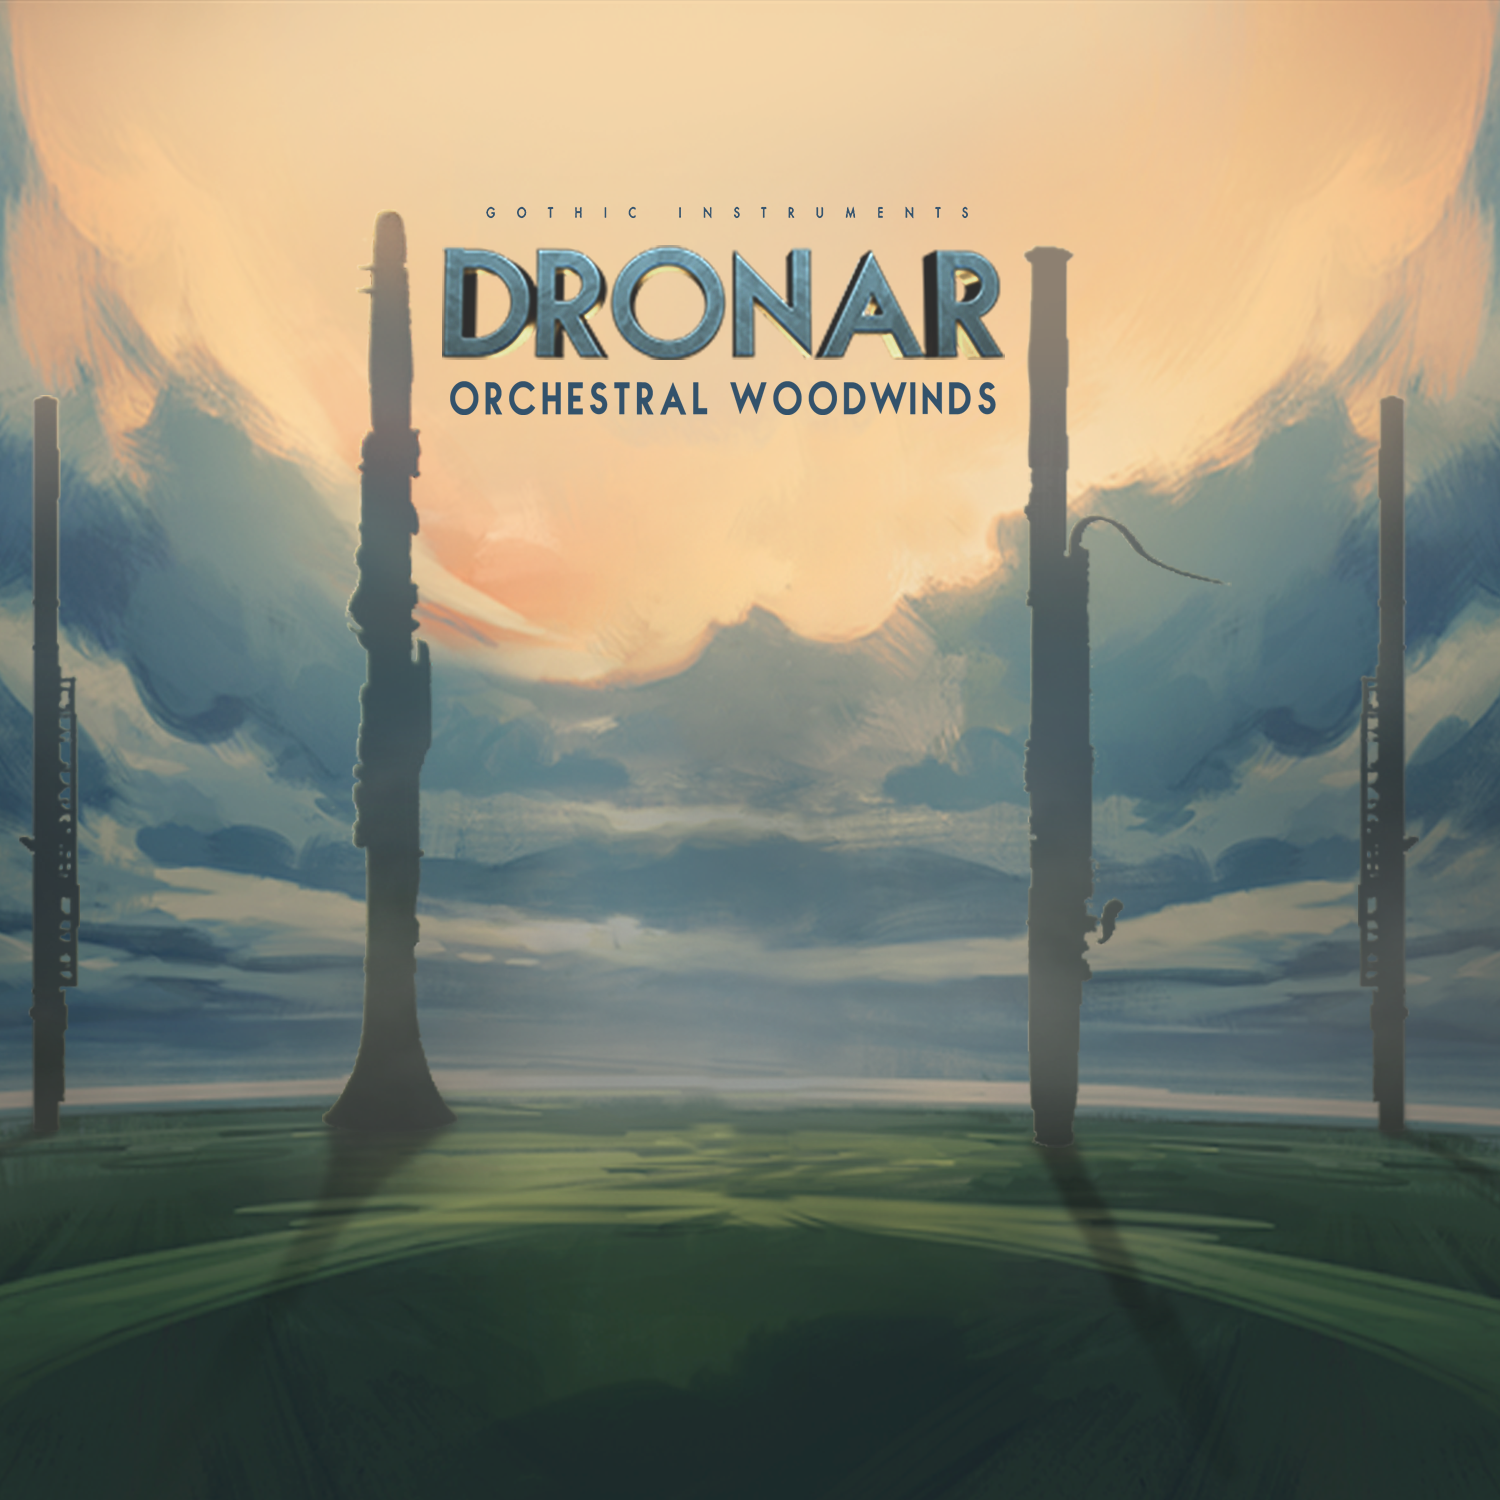 Dronar Orchestral Woodwinds